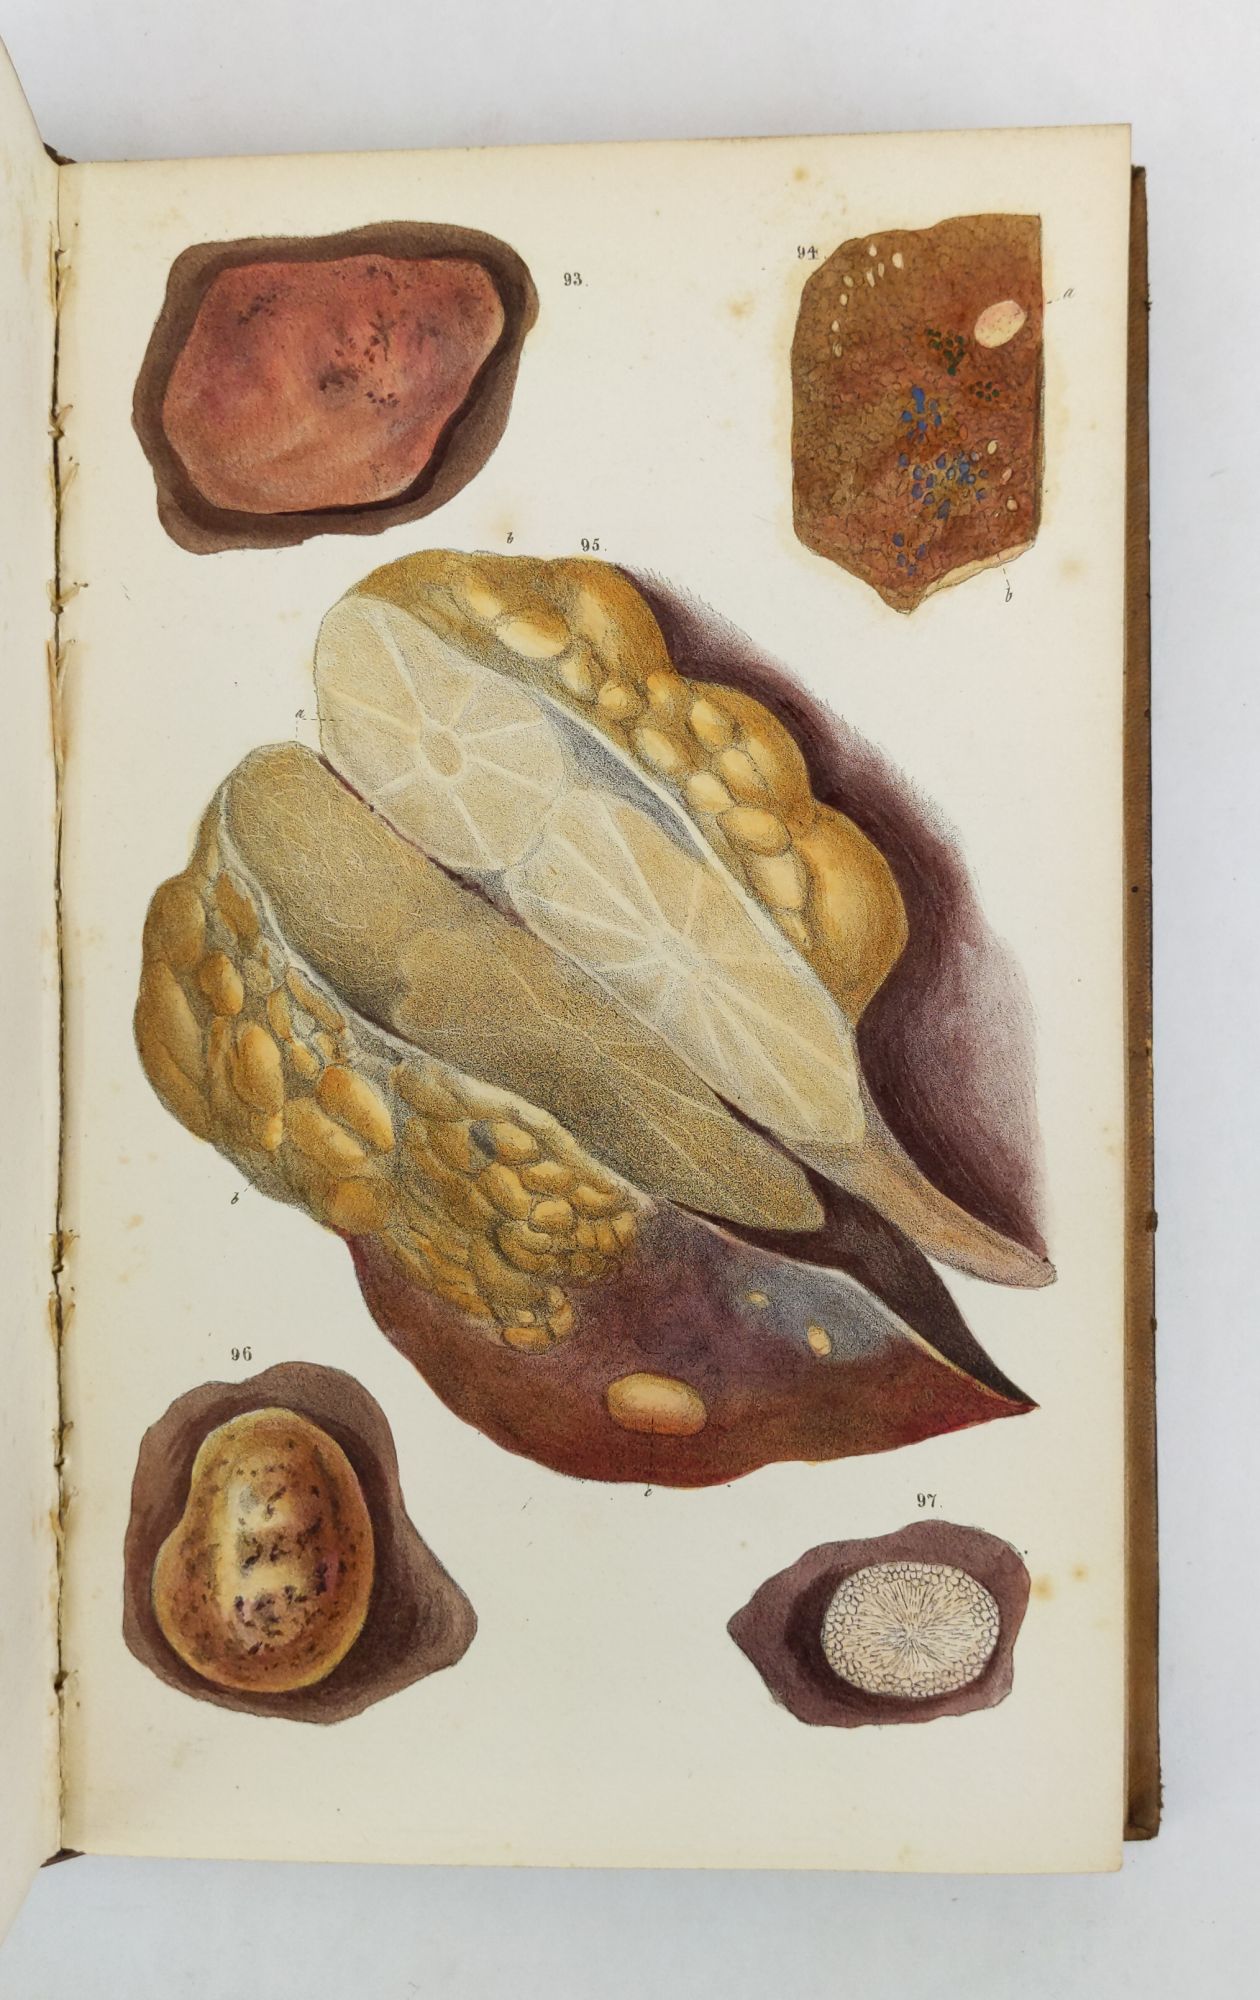 Product Image for PRINCIPLES OF PATHOLOGICAL ANATOMY: ADAPTED TO THE CYCLOPEDIA OF PRACTICAL MEDICINE AND ANDRAL'S ELEMENTS. WITH TWO HUNDRED AND SIXTY BEAUTIFULLY COLORED ILLUSTRATIONS